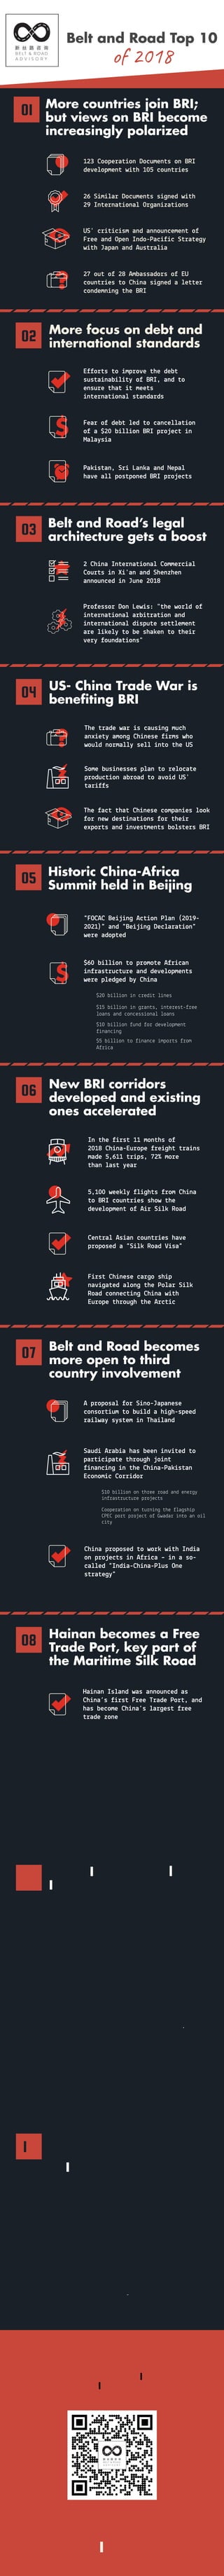 Belt and Road Top 10
of 2018
More countries join BRI;
but views on BRI become
increasingly polarized
01
123 oope a on Do umen s on BRI
de e opmen w h 105 oun es
?
26 S m a Do umen s s ned w h
29 In e na ona O an za ons
US' sm and announ emen o
F ee and Open Indo-Pa S a e
w h apan and Aus a a
27 ou o 28 Ambassado s o EU
oun es o h na s ned a e e
ondemn n he BRI
More focus on debt and
international standards02
$
E o s o mp o e he deb
sus a nab o BRI, and o
ensu e ha mee s
n e na ona s anda ds
Fea o deb ed o an e a on
o a $20 b on BRI p o e n
Ma a s a
Pa s an, S Lan a and Nepa
ha e a pos poned BRI p o e s
Belt and Road’s legal
architecture gets a boost
03
2 h na In e na ona omme a
ou s n X 'an and Shenzhen
announ ed n une 2018
P o esso Don Lew s: " he wo d o
n e na ona a b a on and
n e na ona d spu e se emen
a e e o be sha en o he
e ounda ons"
US- China Trade War is
benefiting BRI
04
The ade wa s aus n mu h
anx e amon h nese ms who
wou d no ma se n o he US
The a ha h nese ompan es oo
o new des na ons o he
expo s and n es men s bo s e s BRI
Some bus nesses p an o e o a e
p odu on ab oad o a o d US'
a s
?
Historic China-Africa
Summit held in Beijing
05
$
“FO A Be n A on P an (2019-
2021)” and “Be n De a a on”
we e adop ed
$60 b on o p omo e A an
n as u u e and de e opmen s
we e p ed ed b h na
$20 b on n ed nes
$15 b on n an s, n e es - ee
oans and on ess ona oans
$10 b on und o de e opmen
nan n
$5 b on o nan e mpo s om
A a
New BRI corridors
developed and existing
ones accelerated
06
In he s 11 mon hs o
2018 h na-Eu ope e h a ns
made 5,611 ps, 72% mo e
han as ea
5,100 wee h s om h na
o BRI oun es show he
de e opmen o A S Road
en a As an oun es ha e
p oposed a “S Road sa”
F s h nese a o sh p
na a ed a on he Po a S
Road onne n h na w h
Eu ope h ou h he A
Belt and Road becomes
more open to third
country involvement
07
A p oposa o S no- apanese
onso um o bu d a h h-speed
a wa s s em n Tha and
Saud A ab a has been n ed o
pa pa e h ou h o n
nan n n he h na-Pa s an
E onom o do
h na p oposed o wo w h Ind a
on p o e s n A a – n a so-
a ed “Ind a- h na-P us One
s a e ”
$10 b on on h ee oad and ene
n as u u e p o e s
oope a on on u n n he a sh p
PE po p o e o Gwada n o an o
Hainan becomes a Free
Trade Port, key part of
the Maritime Silk Road
08
Ha nan Is and was announ ed as
h na’s s F ee T ade Po , and
has be ome h na’s a es ee
ade zone
Ha nan De e opmen P an w h 30
spe a po es was e eased
Ha nan s se o be ome a e
pa o he Ma me S Road
China International
Import Exposition seeks
to show China is open
for imports
09
A so sma e p a e s bene ed and
a o d n o MOF OM, 20% o dea s
s ned we e on a m n and
a u u a equ pmen and p odu e
$ Hu e dea s we e s ned a IIE
A baba $200 b on o e he nex
e ea s
NOO L d s ned 20 dea s w h
o e n bus nesses, n ud n
S emens, a e p a and S h umbe e
D $100 b on
o swa en s ned $9 b on wo h o
dea s, Ro s Ro e s ned a $1.45bn
dea w h h na Eas e n o a a
en nes
More foreign firms
trying to benefit from
BRI
10
The h nese o e nmen sa s o e
80 S a e Owned En e p ses ha e
unde a en 3,116 BRI n es men s?
Wes e n ban s ha e a so been
be n b on BRI h s ea
Fo ow n HSB , oup announ ed
had appo n ed a e e an n es men
ban e s head o Be and Road
In a e- e a ed ban n and
o na on bus nesses
Subscribe and get updates
on BRI in 2019
or send an email at
subscribe@beltandroad.ventures
Scan the QR Code Now
 